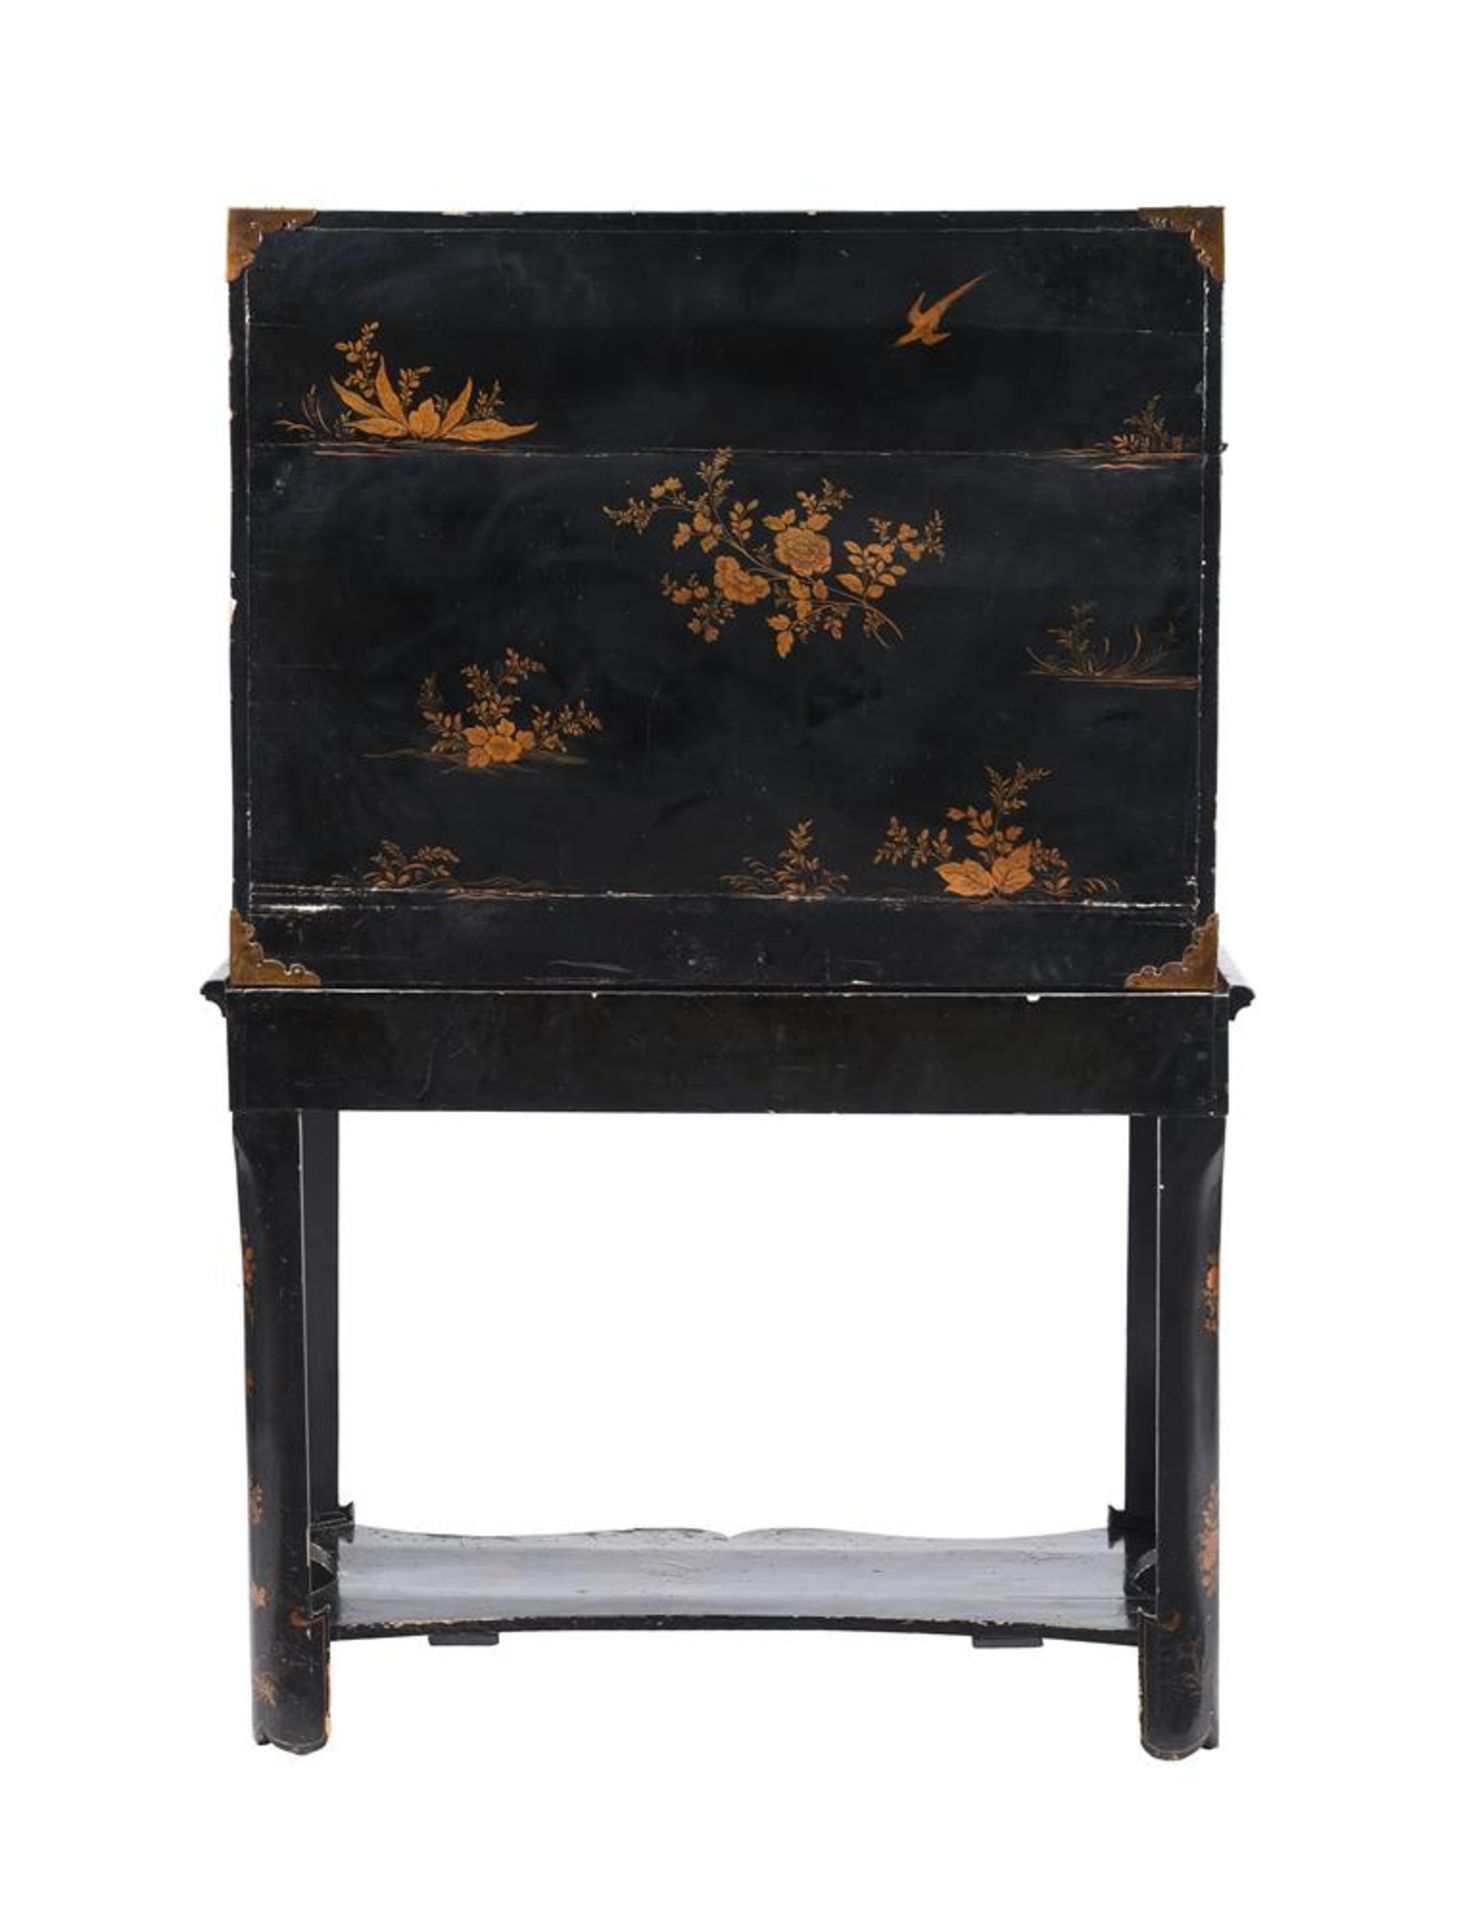 A BLACK LACQUER AND GILT CHINOISERIE DECORATED CABINET ON STAND, 18TH CENTURY - Image 5 of 7